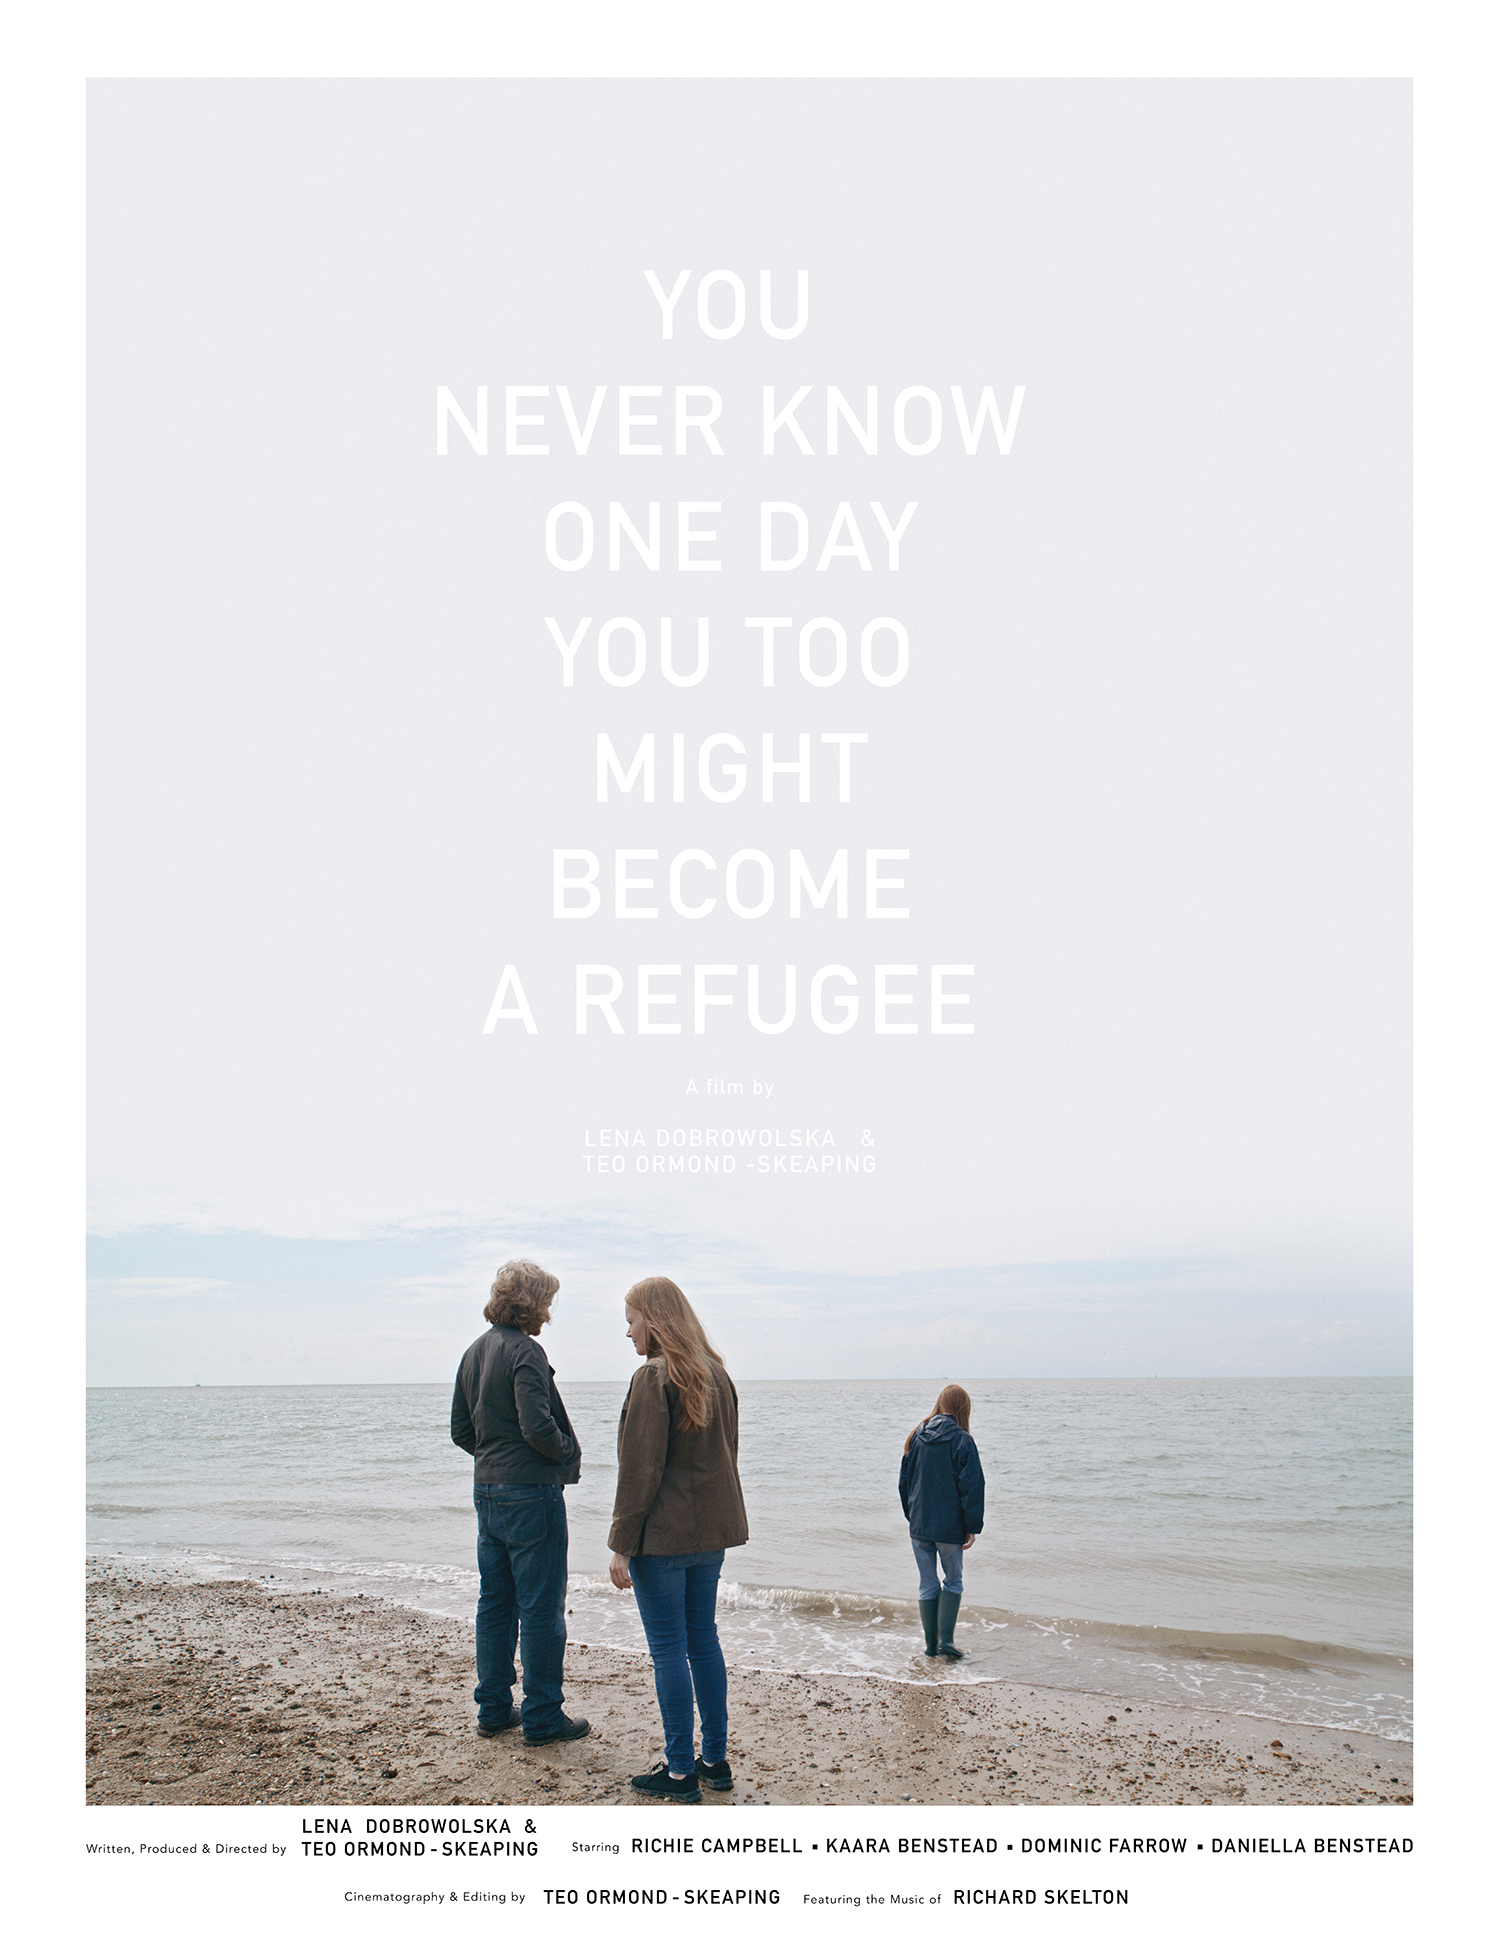 You Never Know, One Day You Too Might Become a Refugee